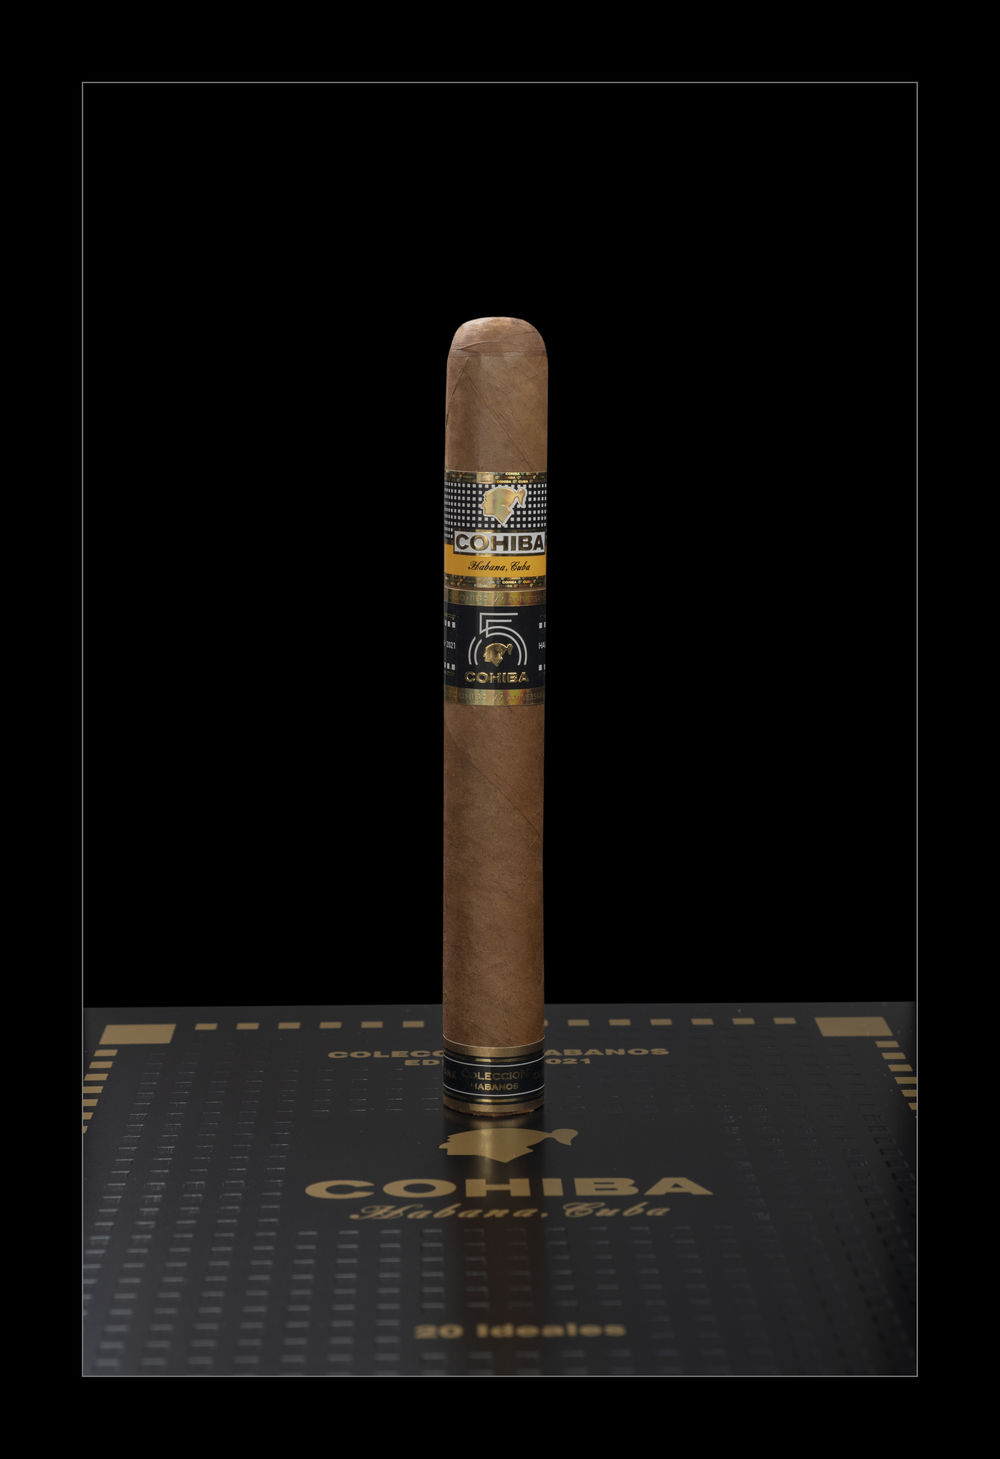 Cohiba Colección Cabinet Ideales: 20 cigars find their place in the "book".